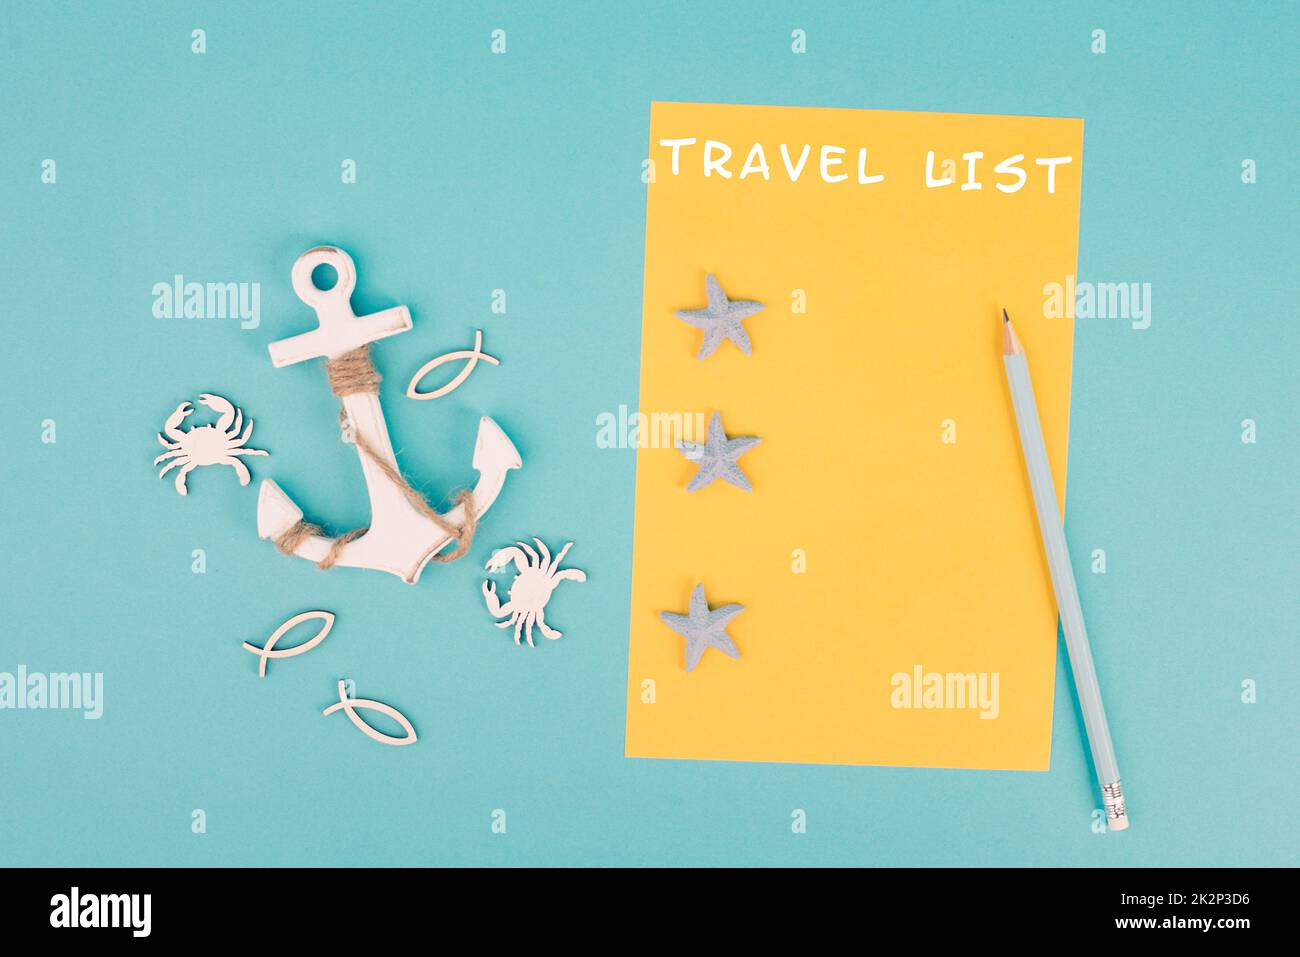 Travel list is standing on the yellow colored paper, anchor with fish sea stars and crabs, holiday plan and destination, vacation and lifestyle concept Stock Photo